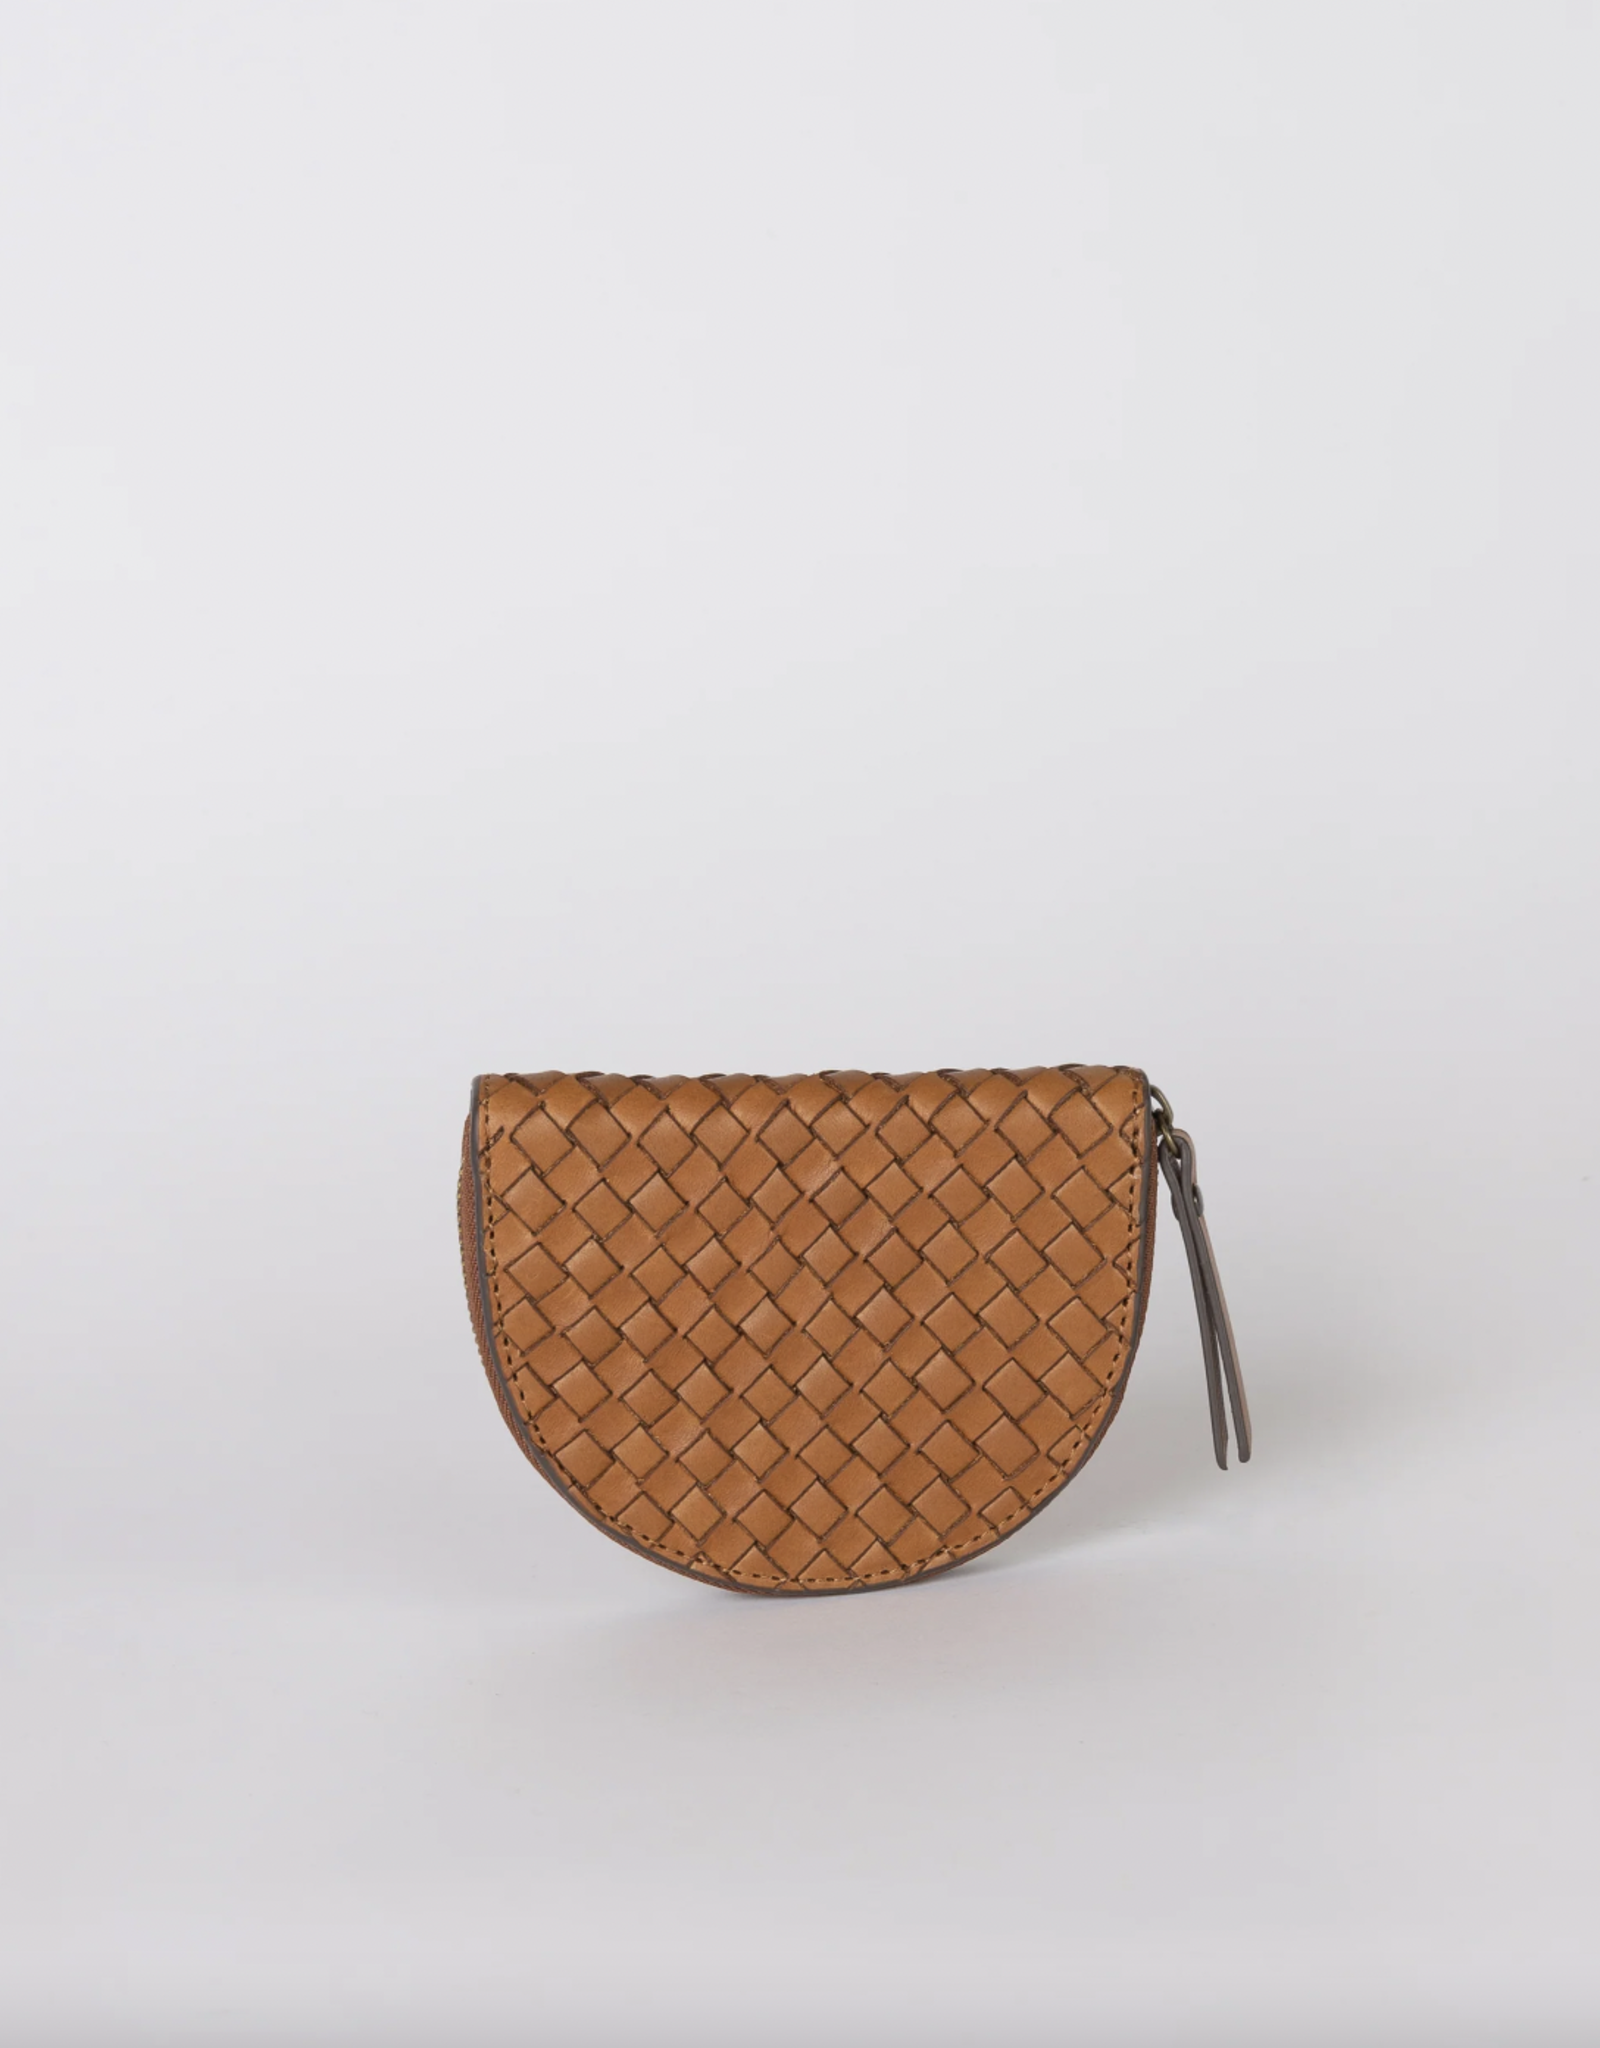 O My Bag Laura coin purse - cognac woven classic leather